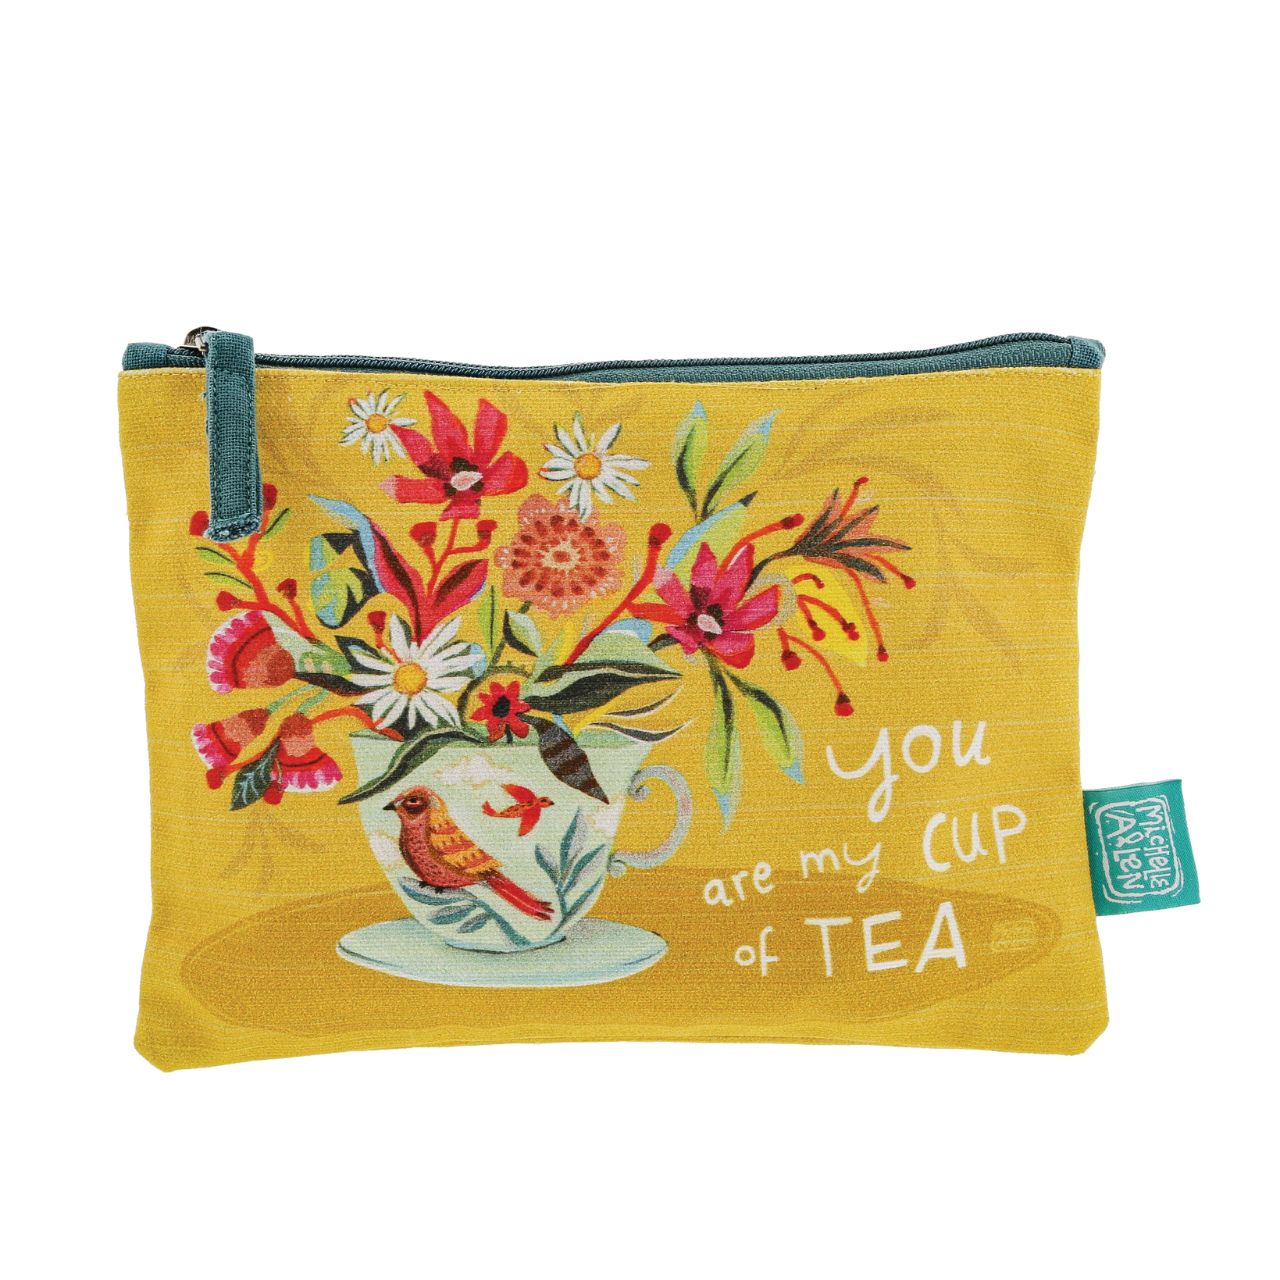 Michelle Allen Cup of Tea Zipped Pouch Medium  These beautiful zippered 100% Cotton pouches are perfect for pencils/pens, trinkets, charging cords, make up or pretty much anything you can possibly think of. Exclusively designed by Michelle Allen.